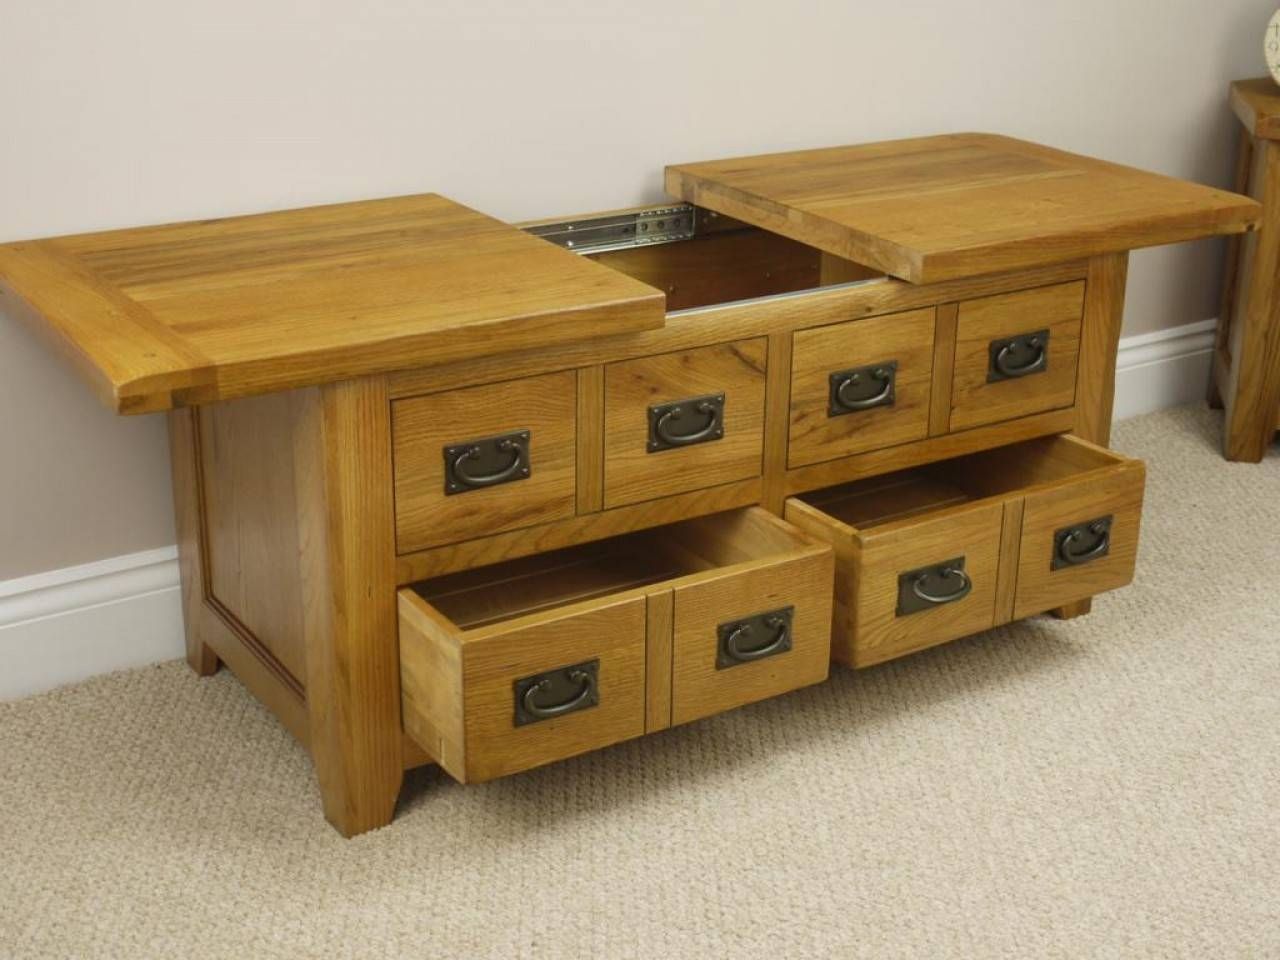 Square Oak Coffee Tables With Storage | Coffee Tables Decoration In Square Coffee Tables With Storage (View 14 of 30)